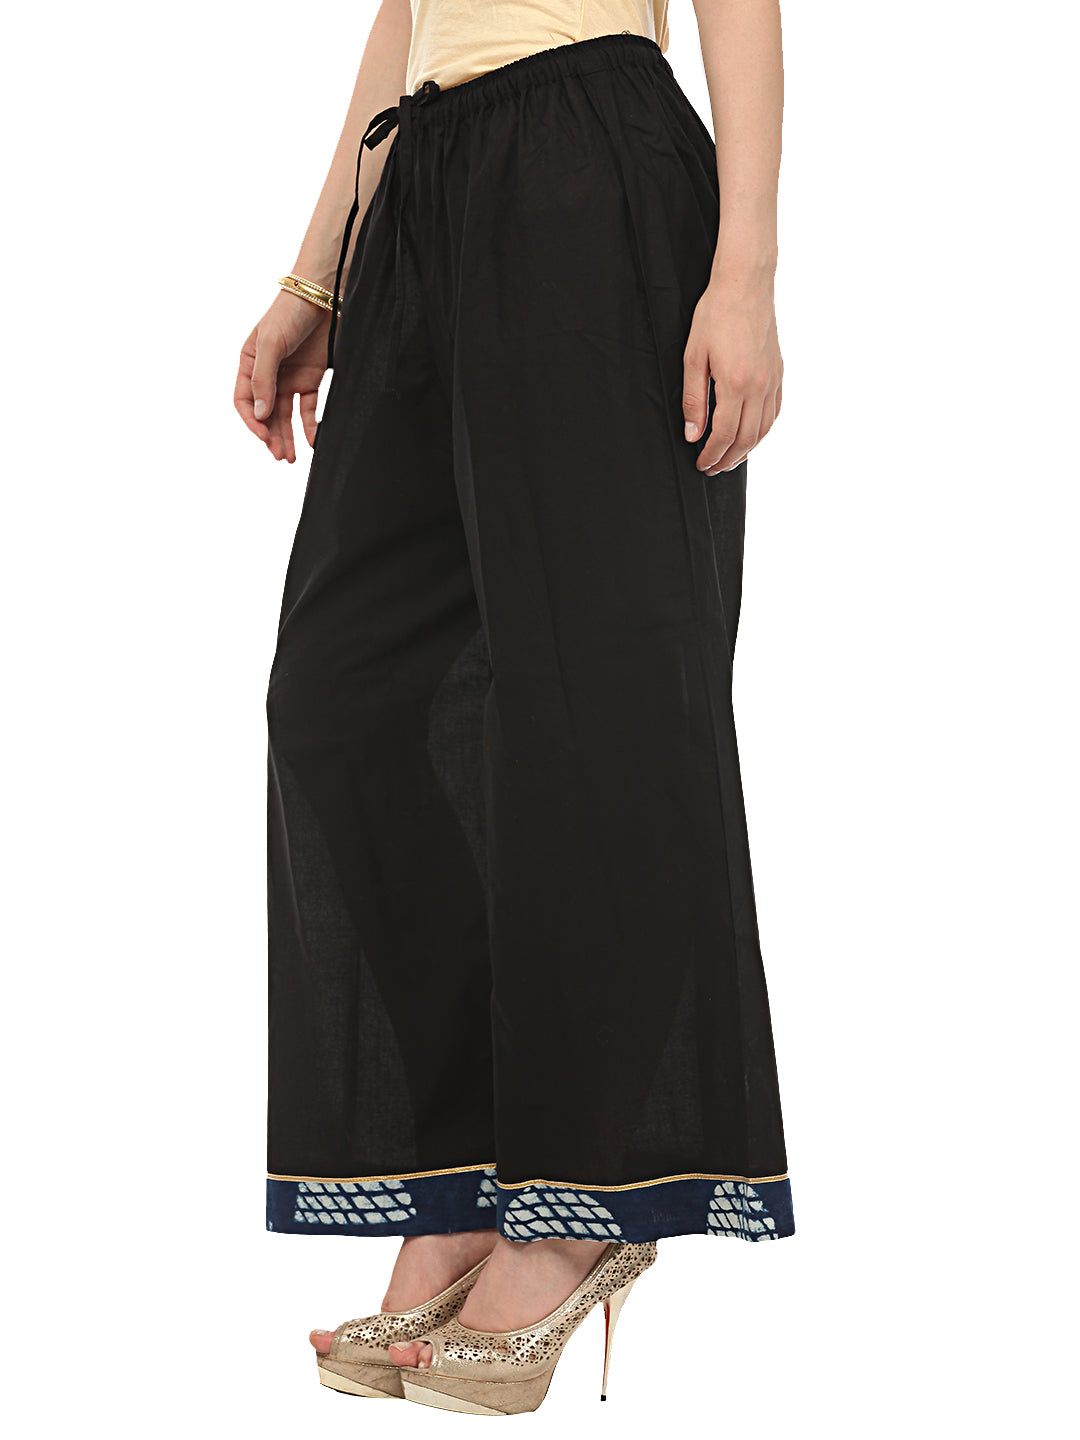 Shop Royal Blue Palazzo Pants by Prisma - Perfect for Any Occasion